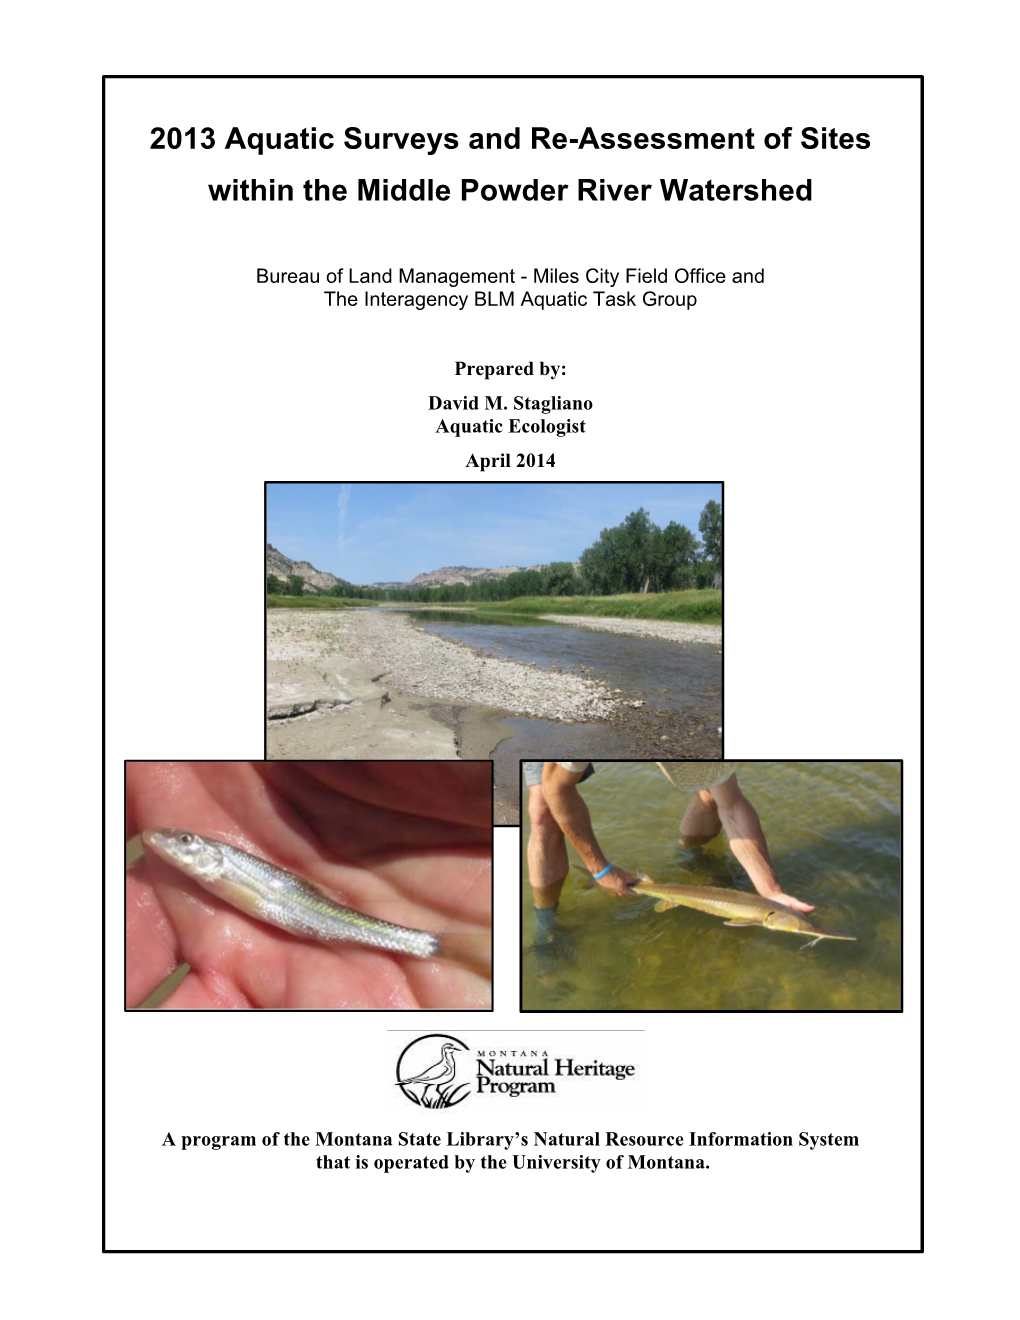 2013 Aquatic Surveys and Re-Assessment of Sites Within the Middle Powder River Watershed